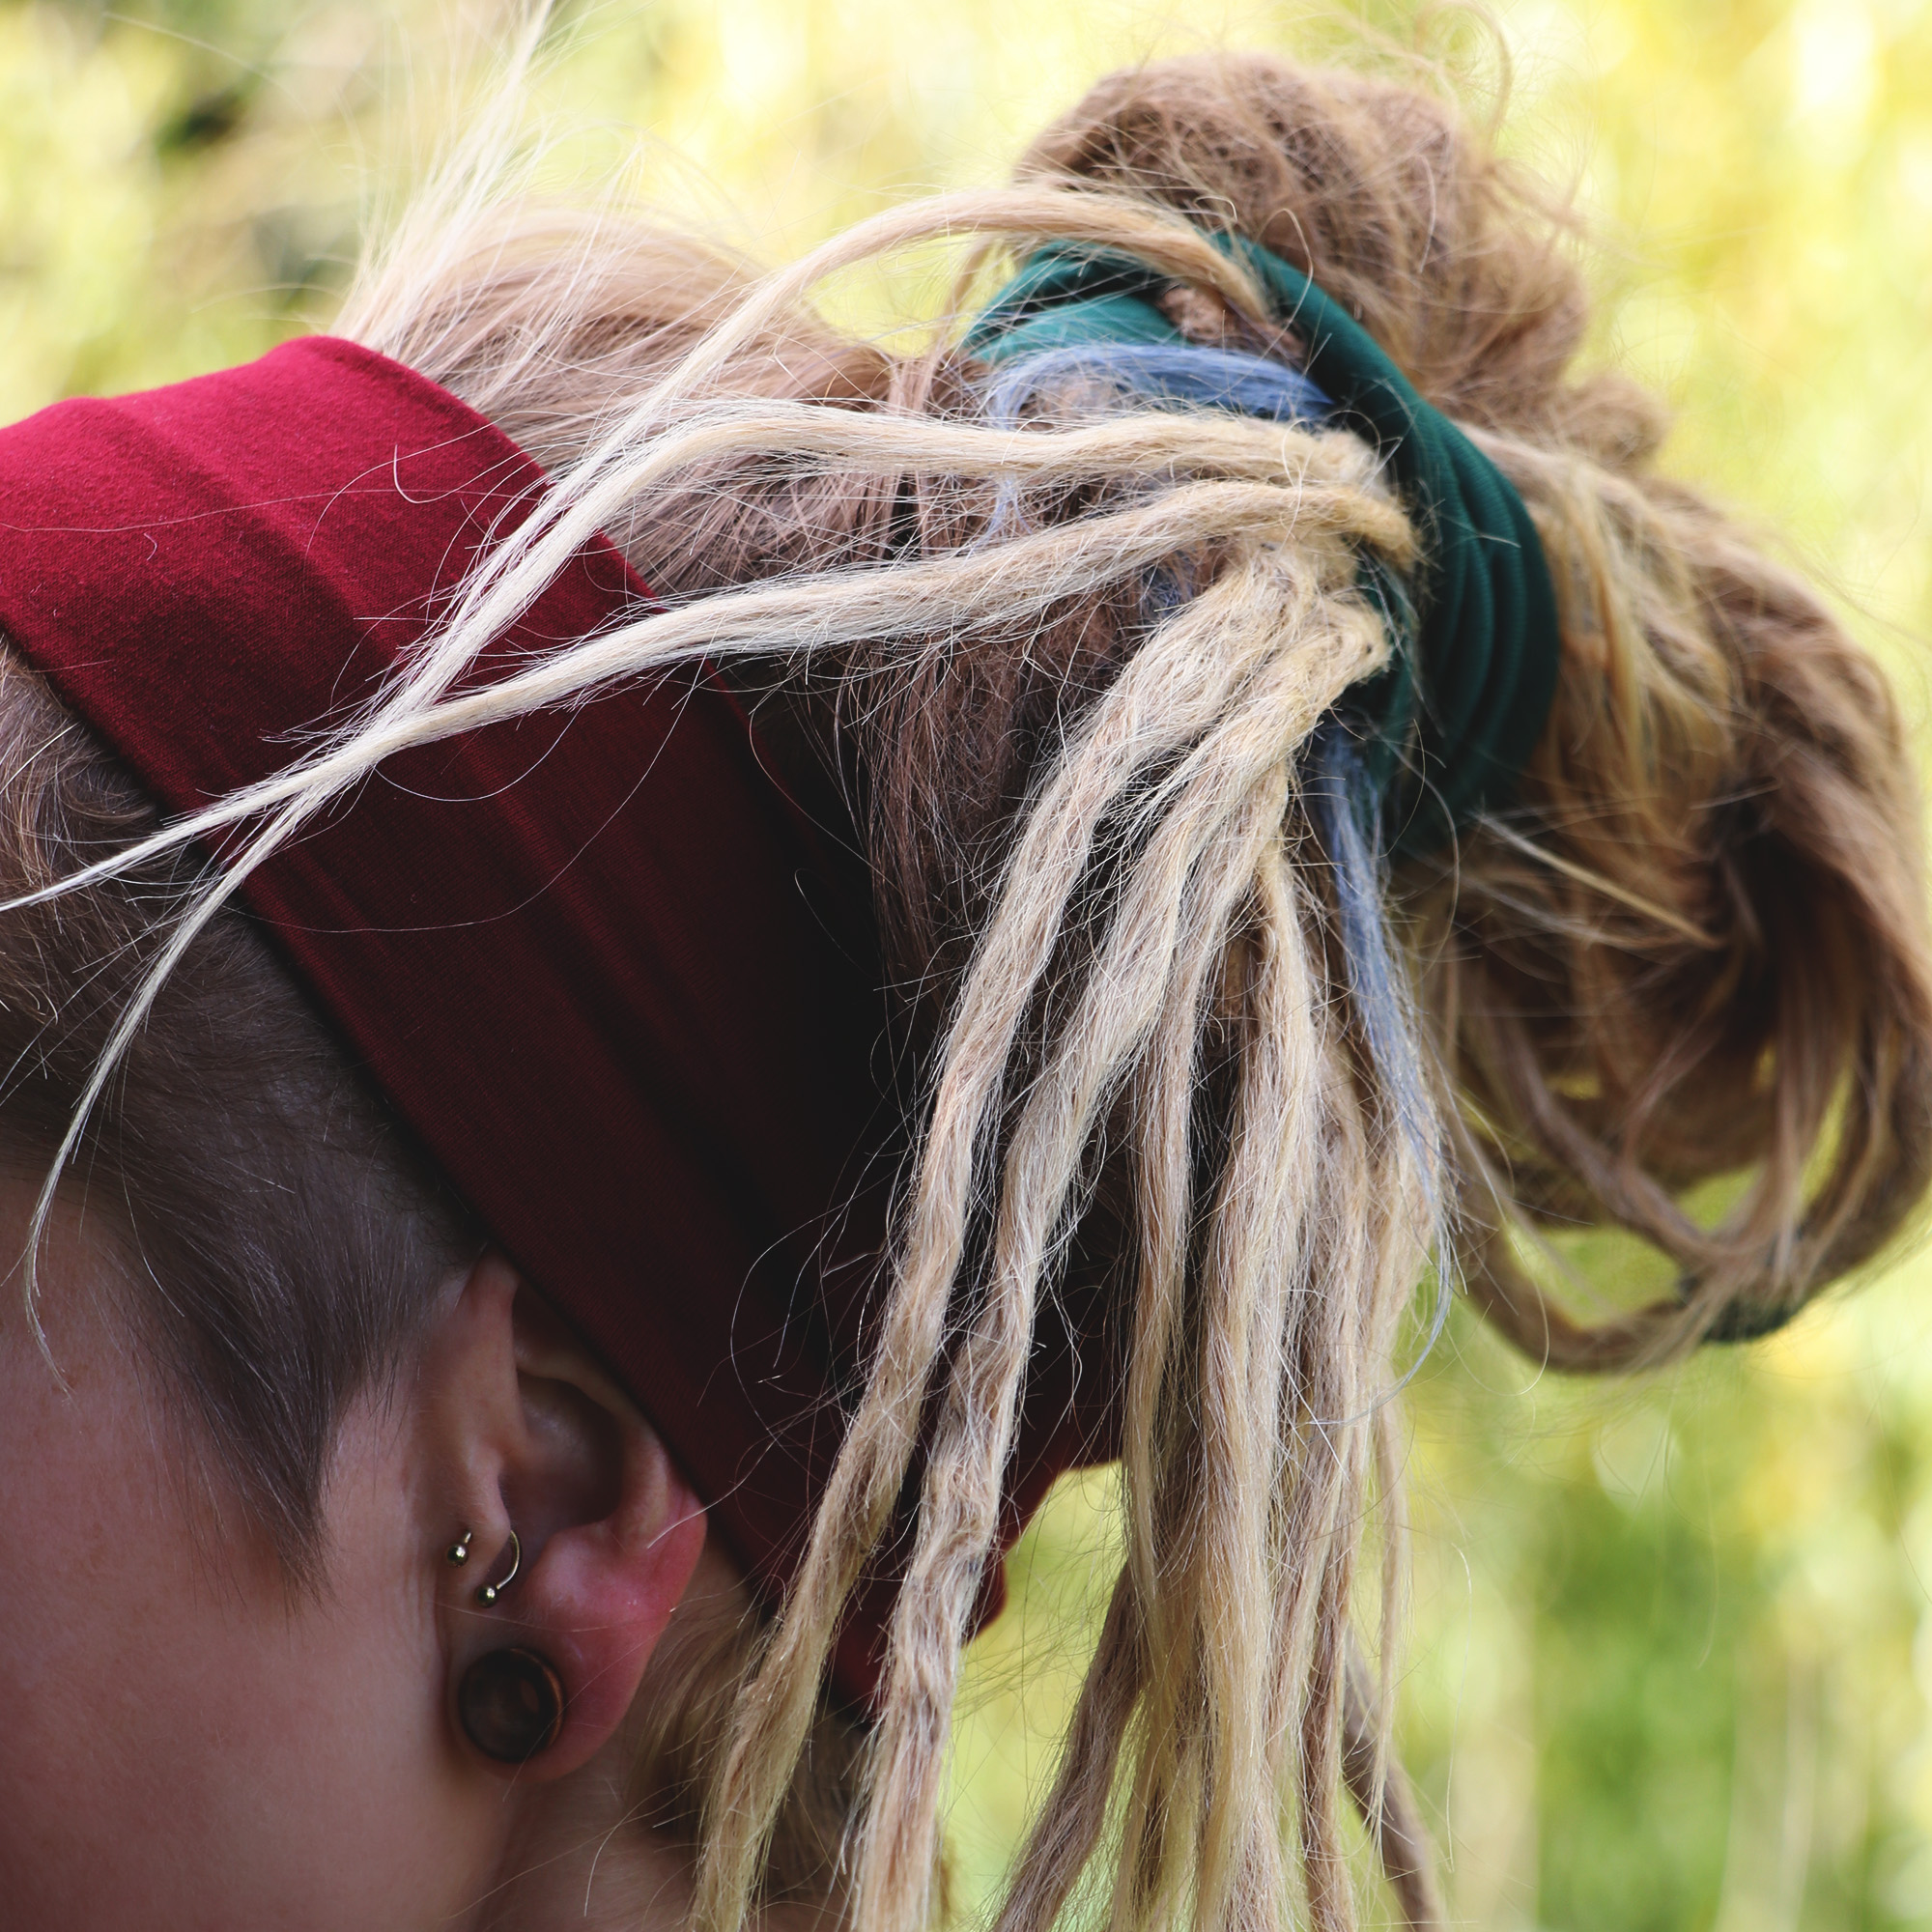 Slim Cotton Hair Band - Perfect for new dreadlocks or sports